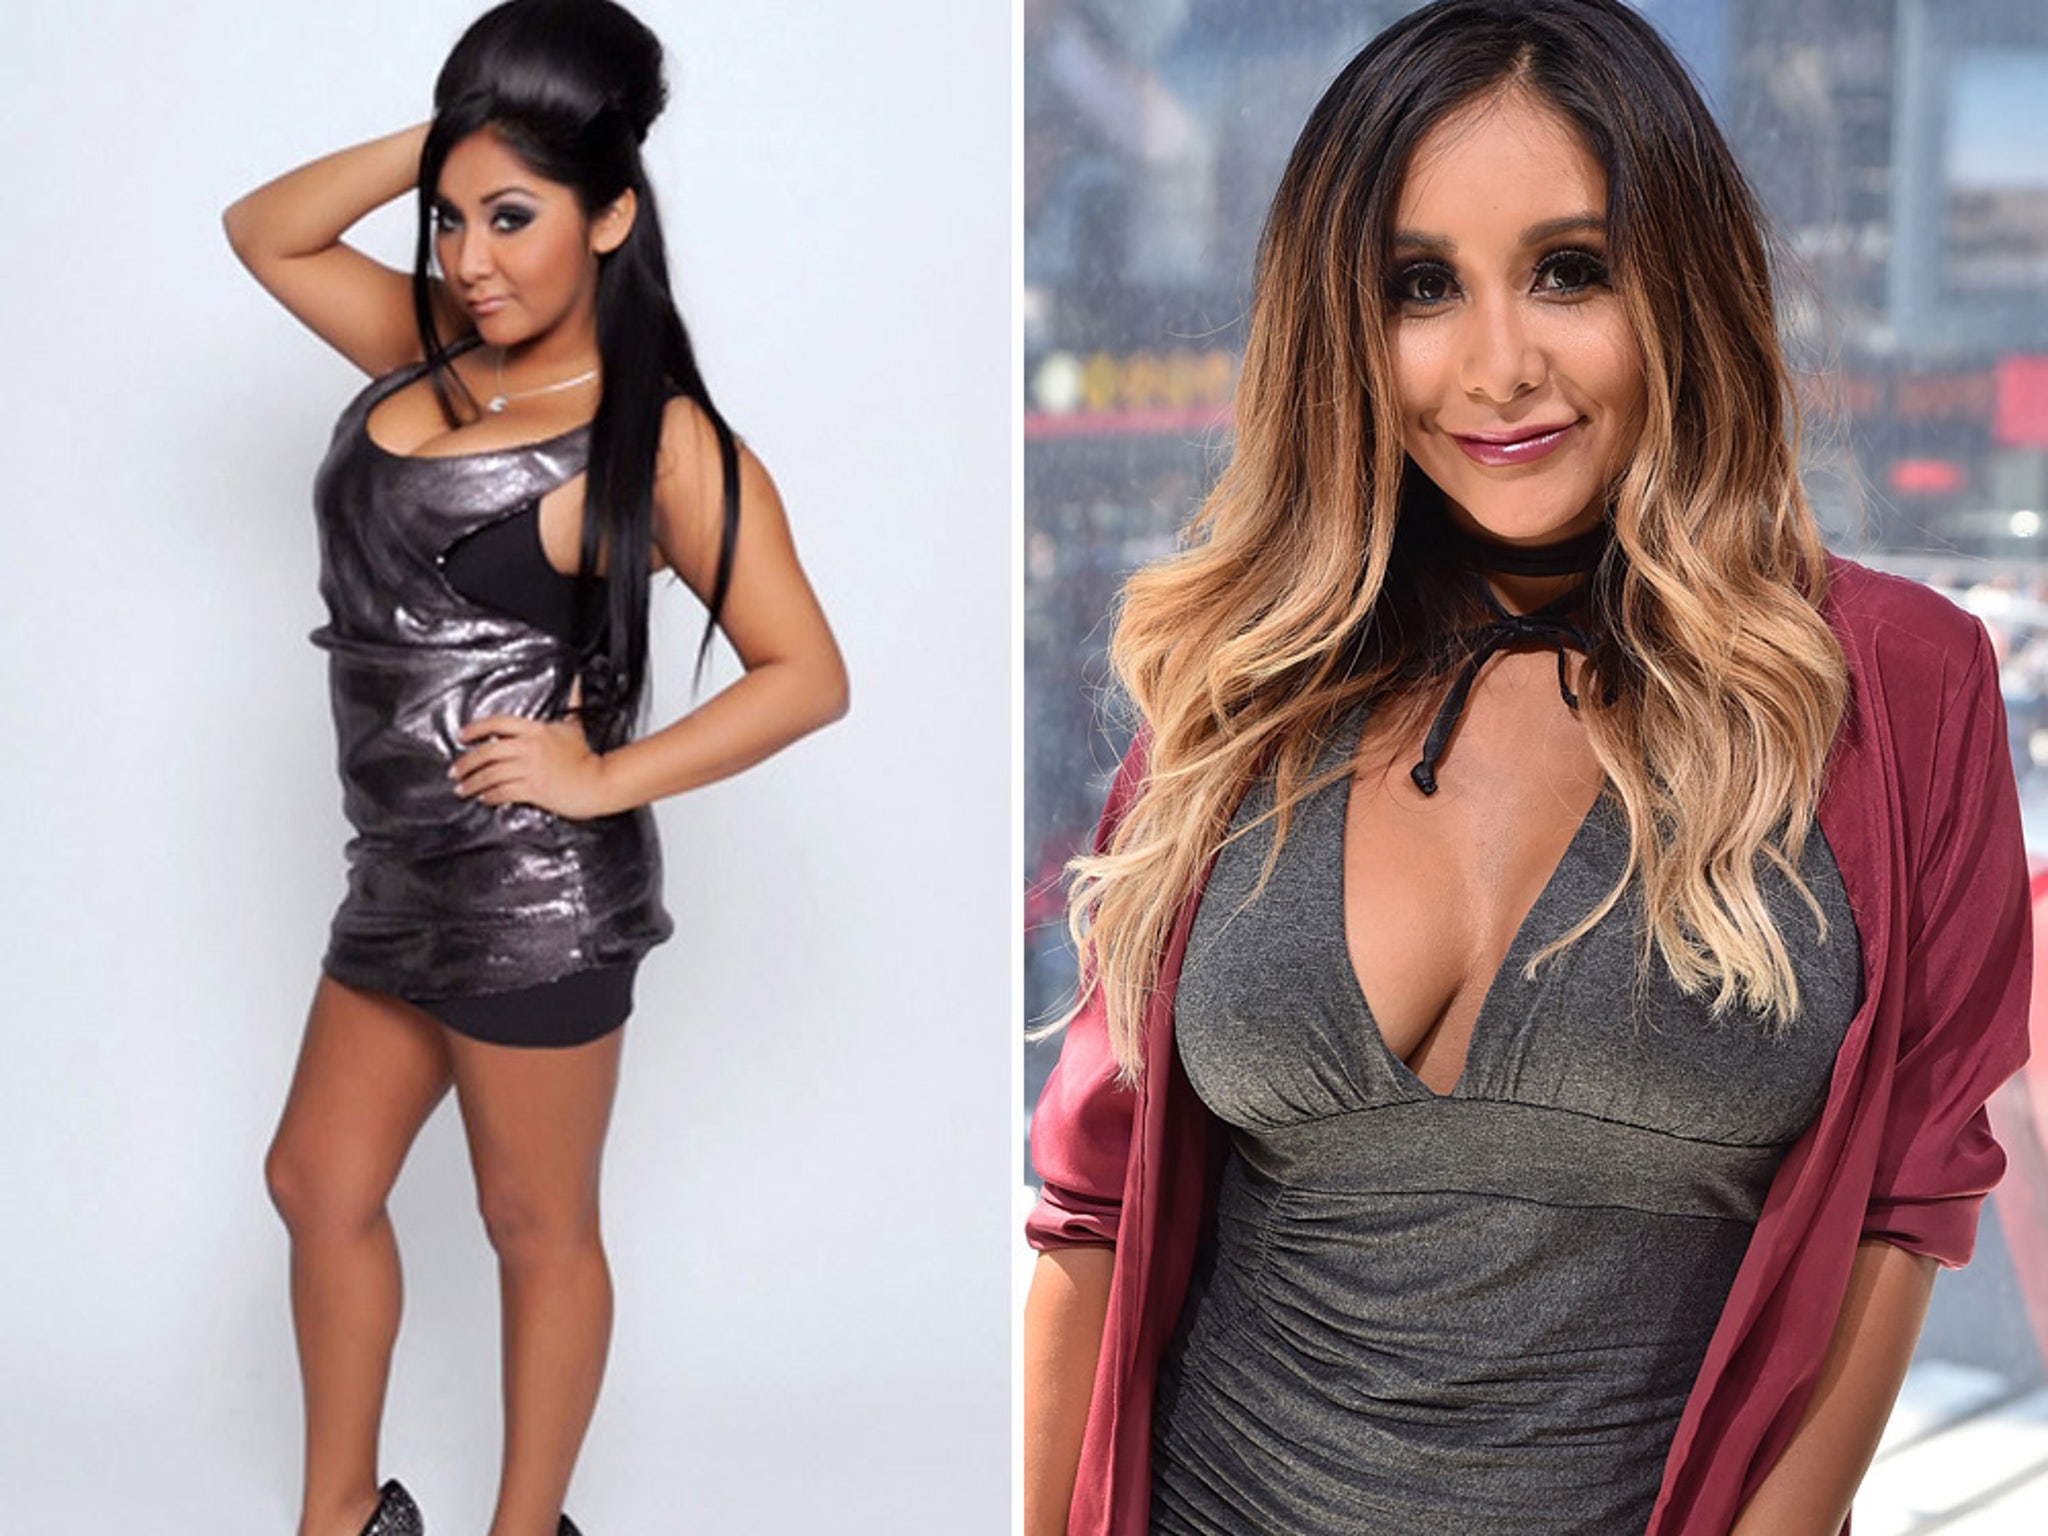 Snooki Transformation: Nicole Polizzi's Weight Loss in Photos